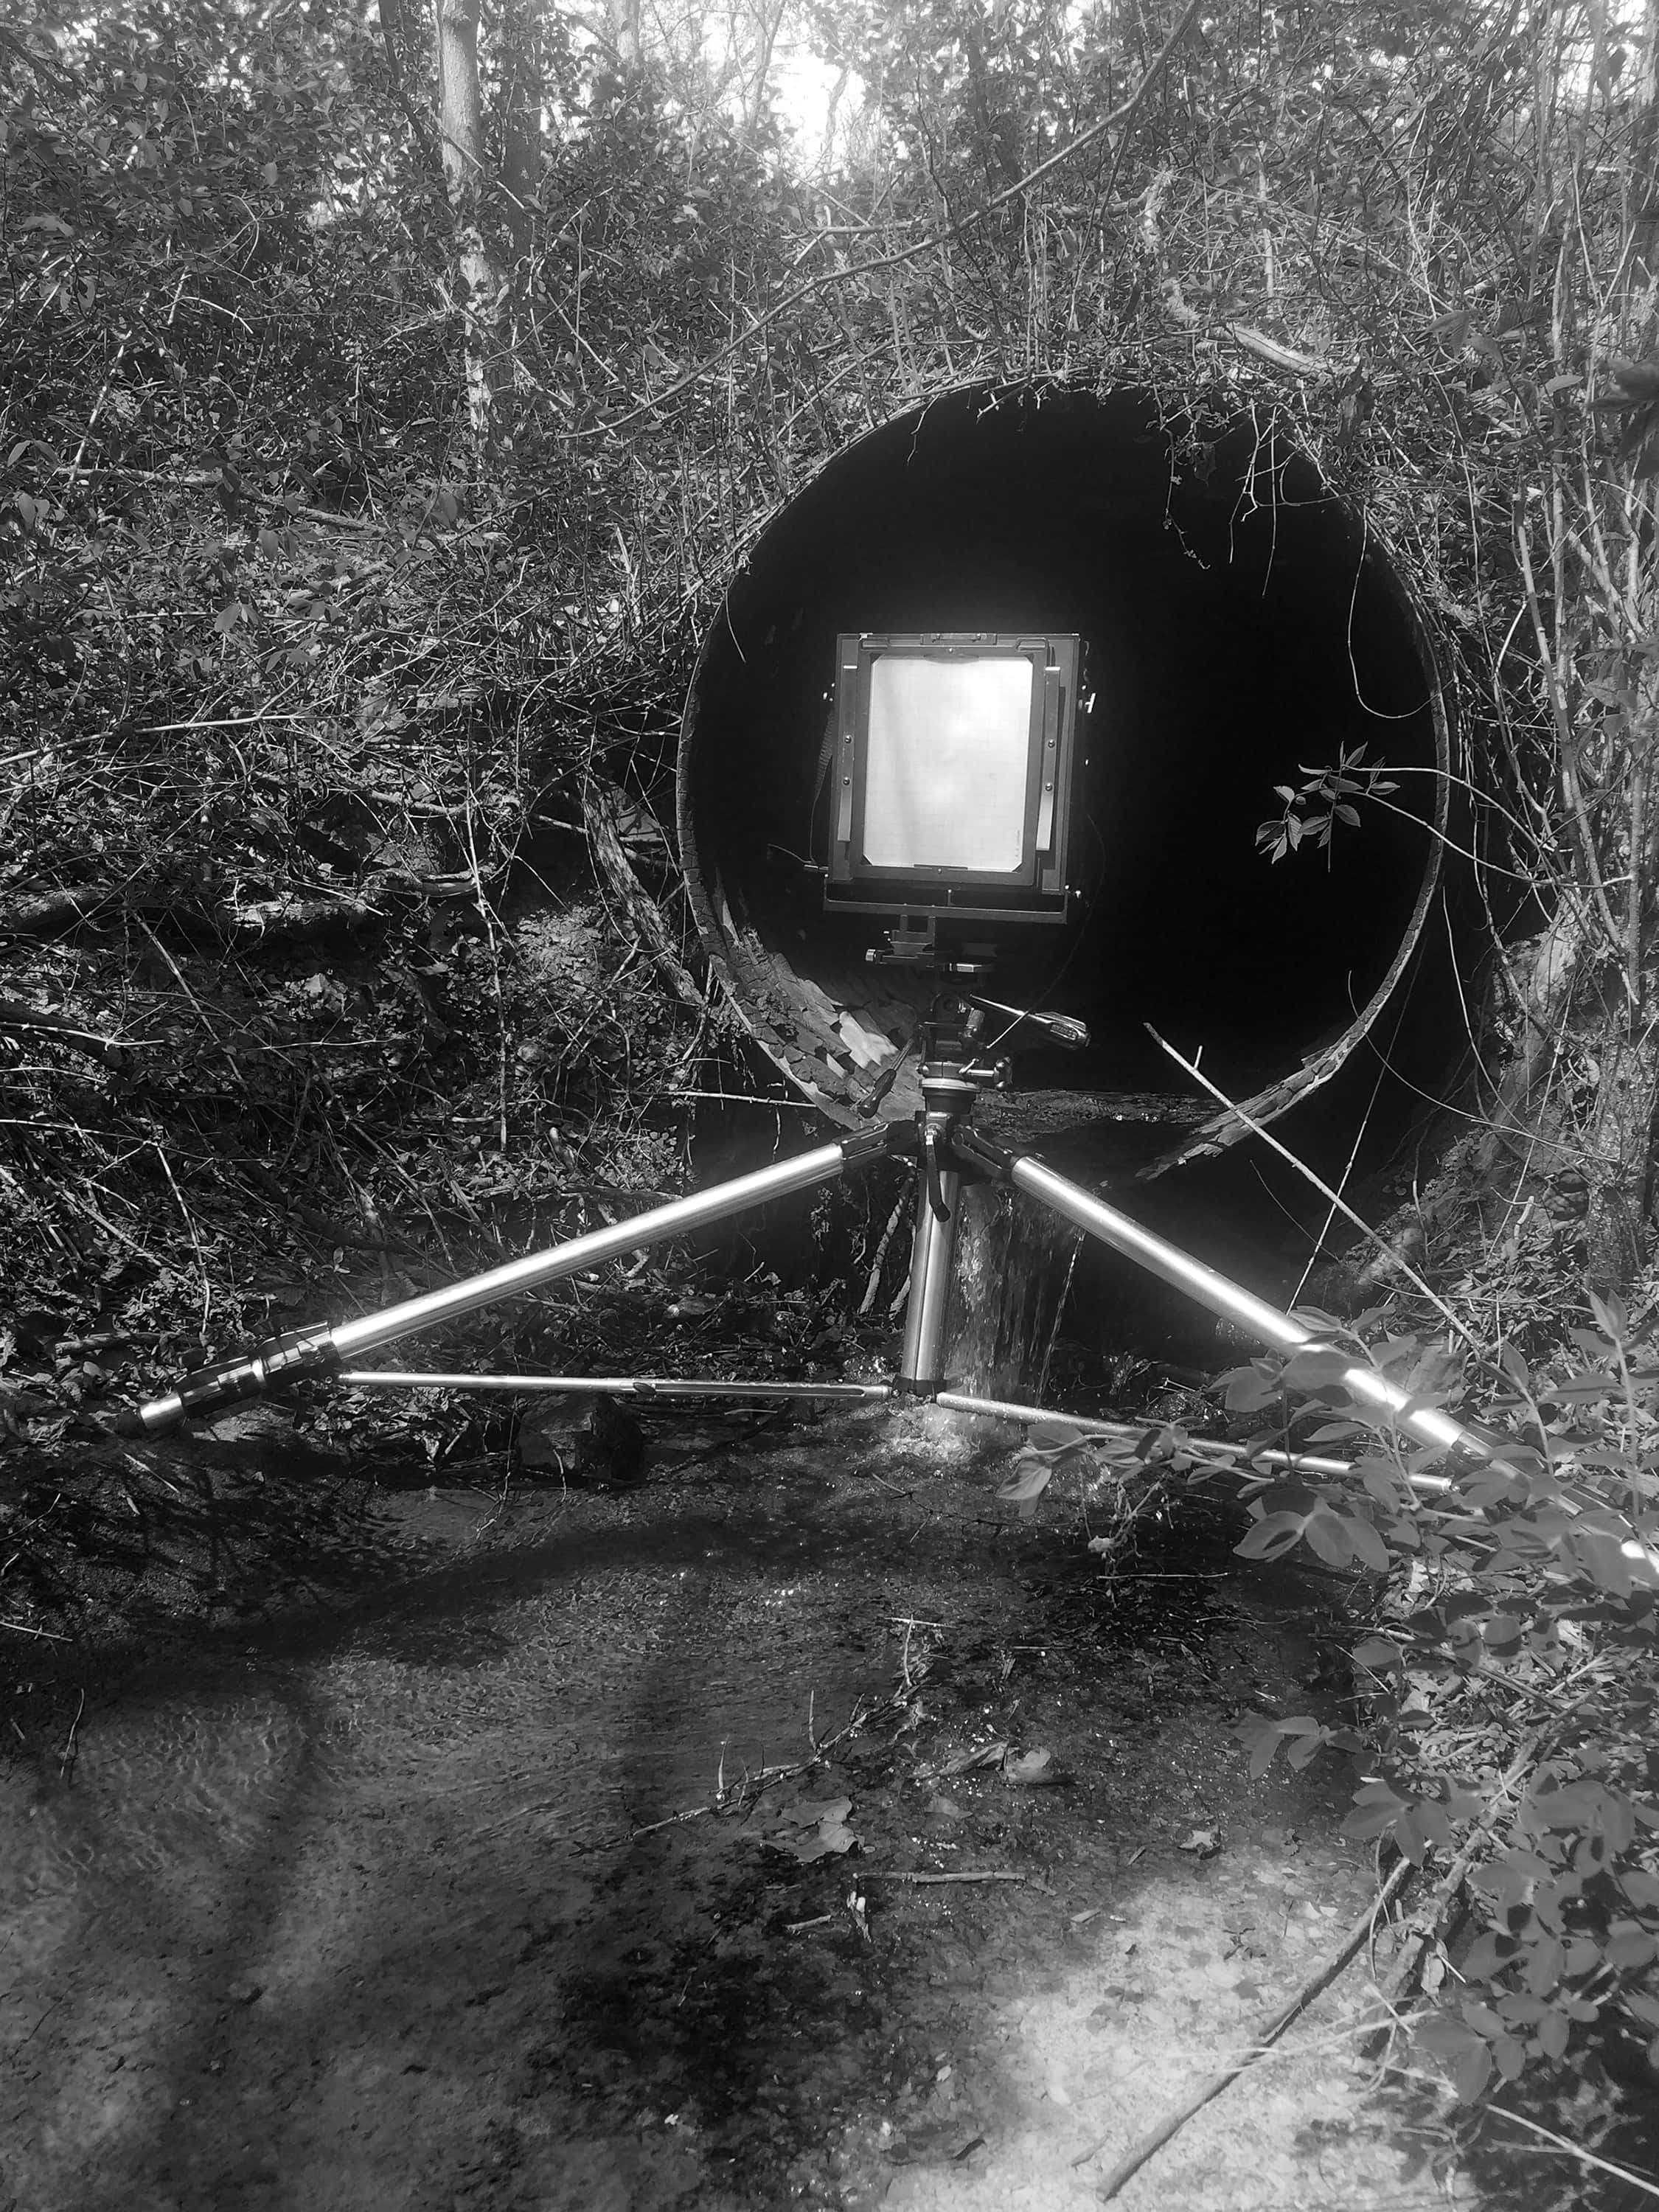 In the woods, a large-format camera on tripod is facing into a large metal culvert out of which a stream flowing.